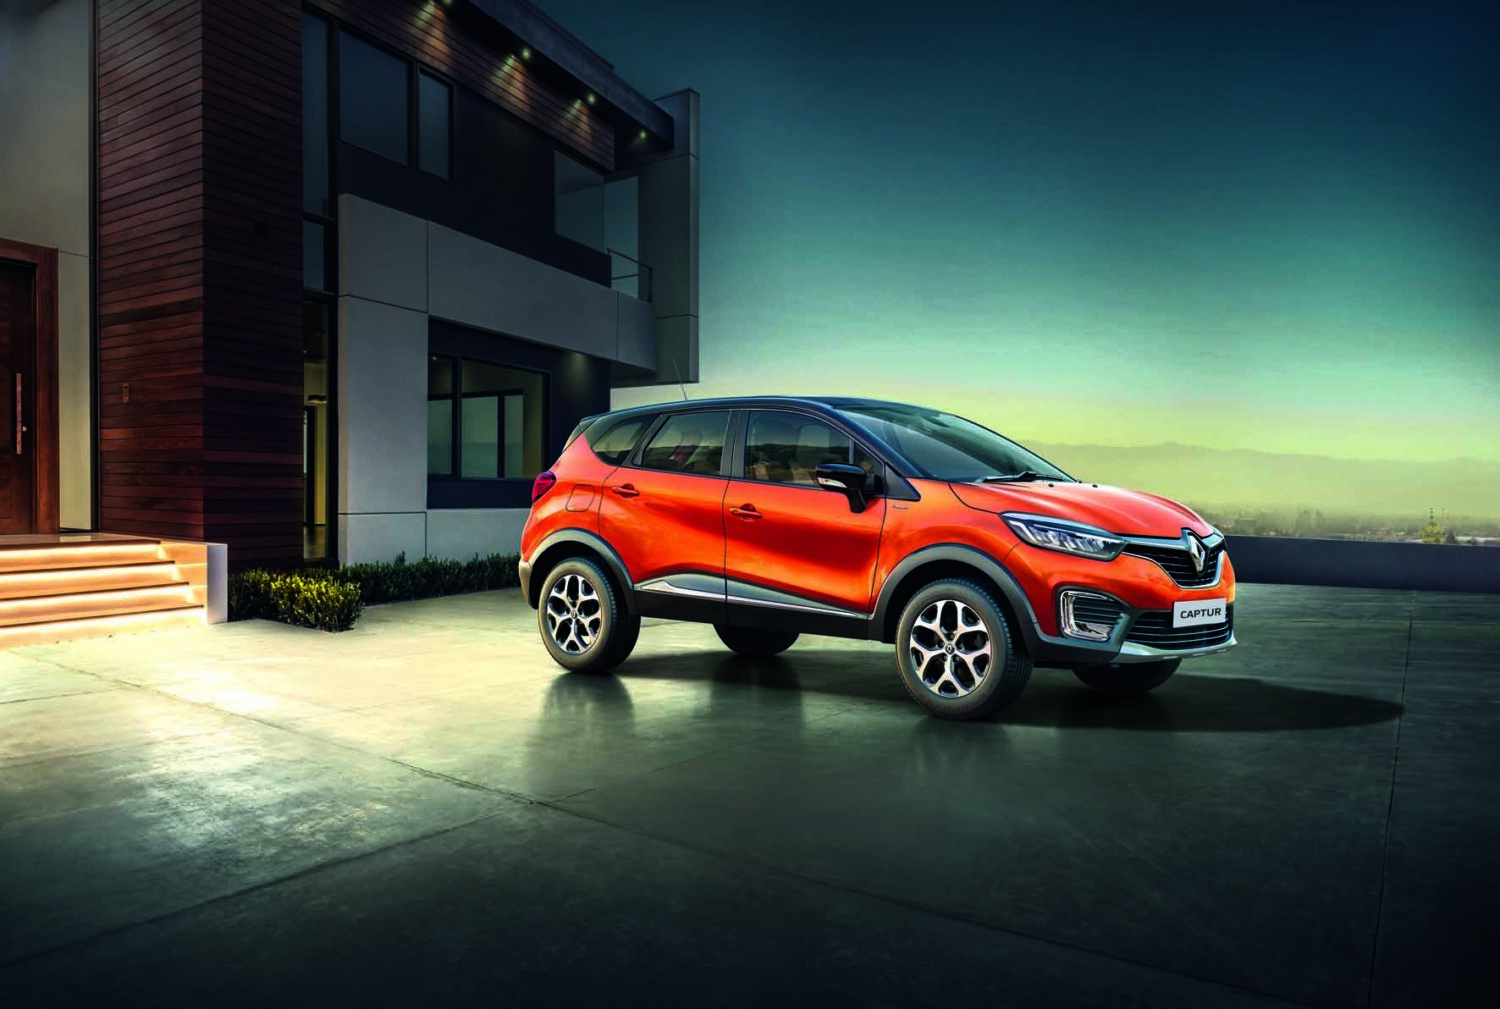 2017 - Renault Captur available for sale in India